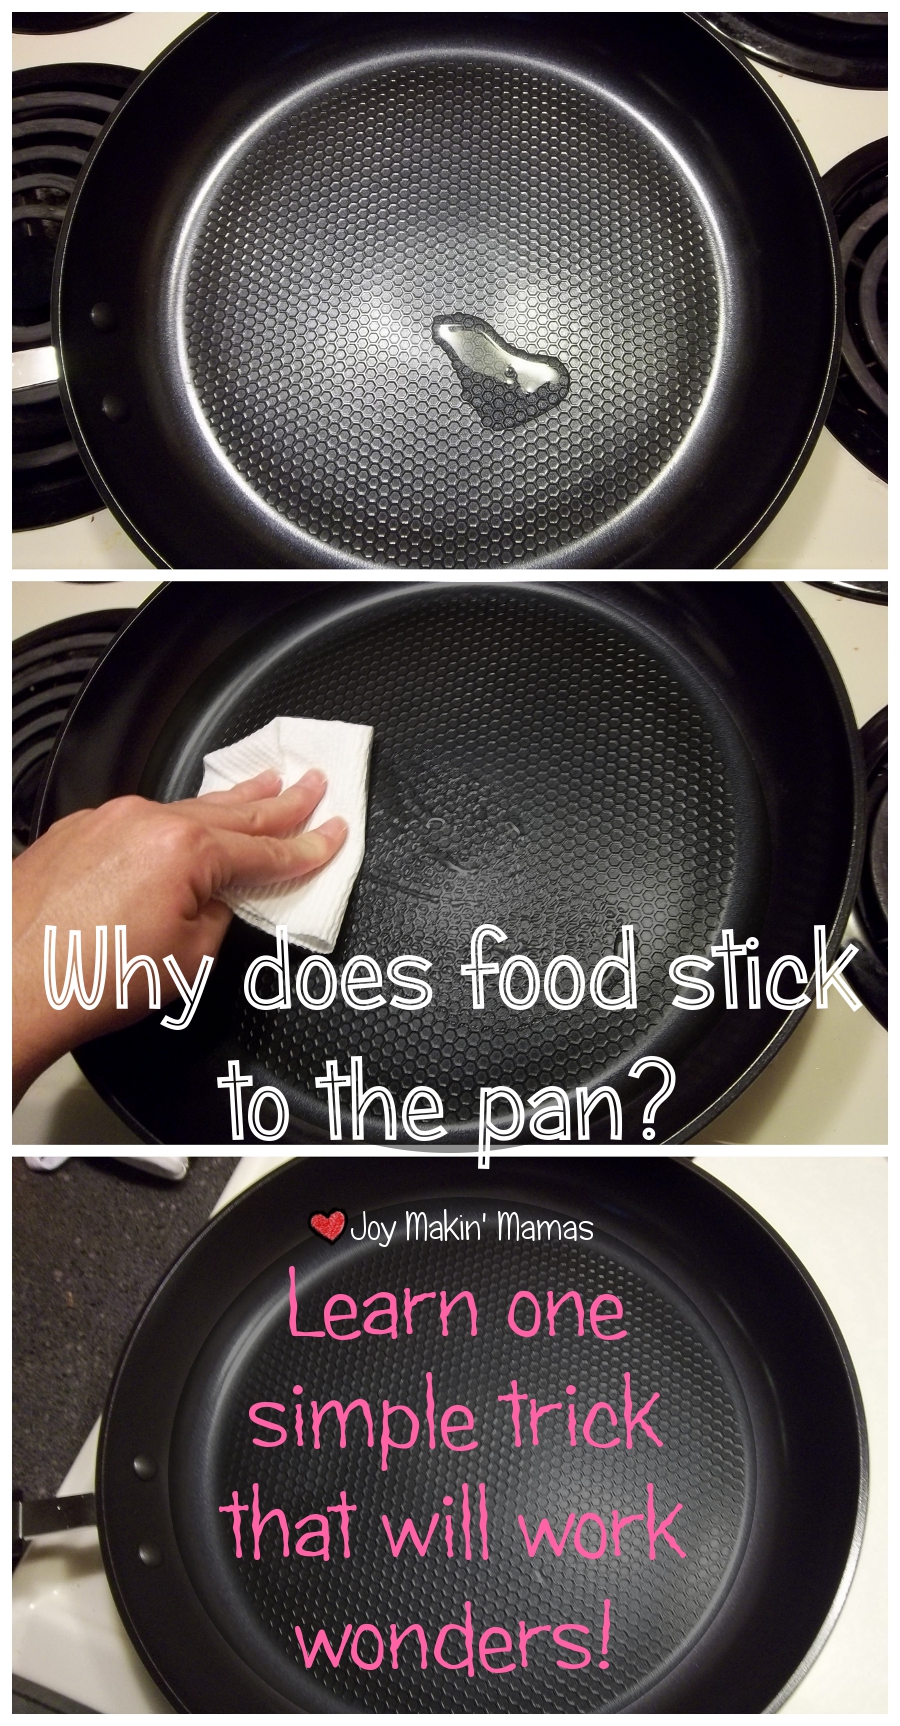 Why does food stick to the pan? Learn one simple trick that will work wonders.